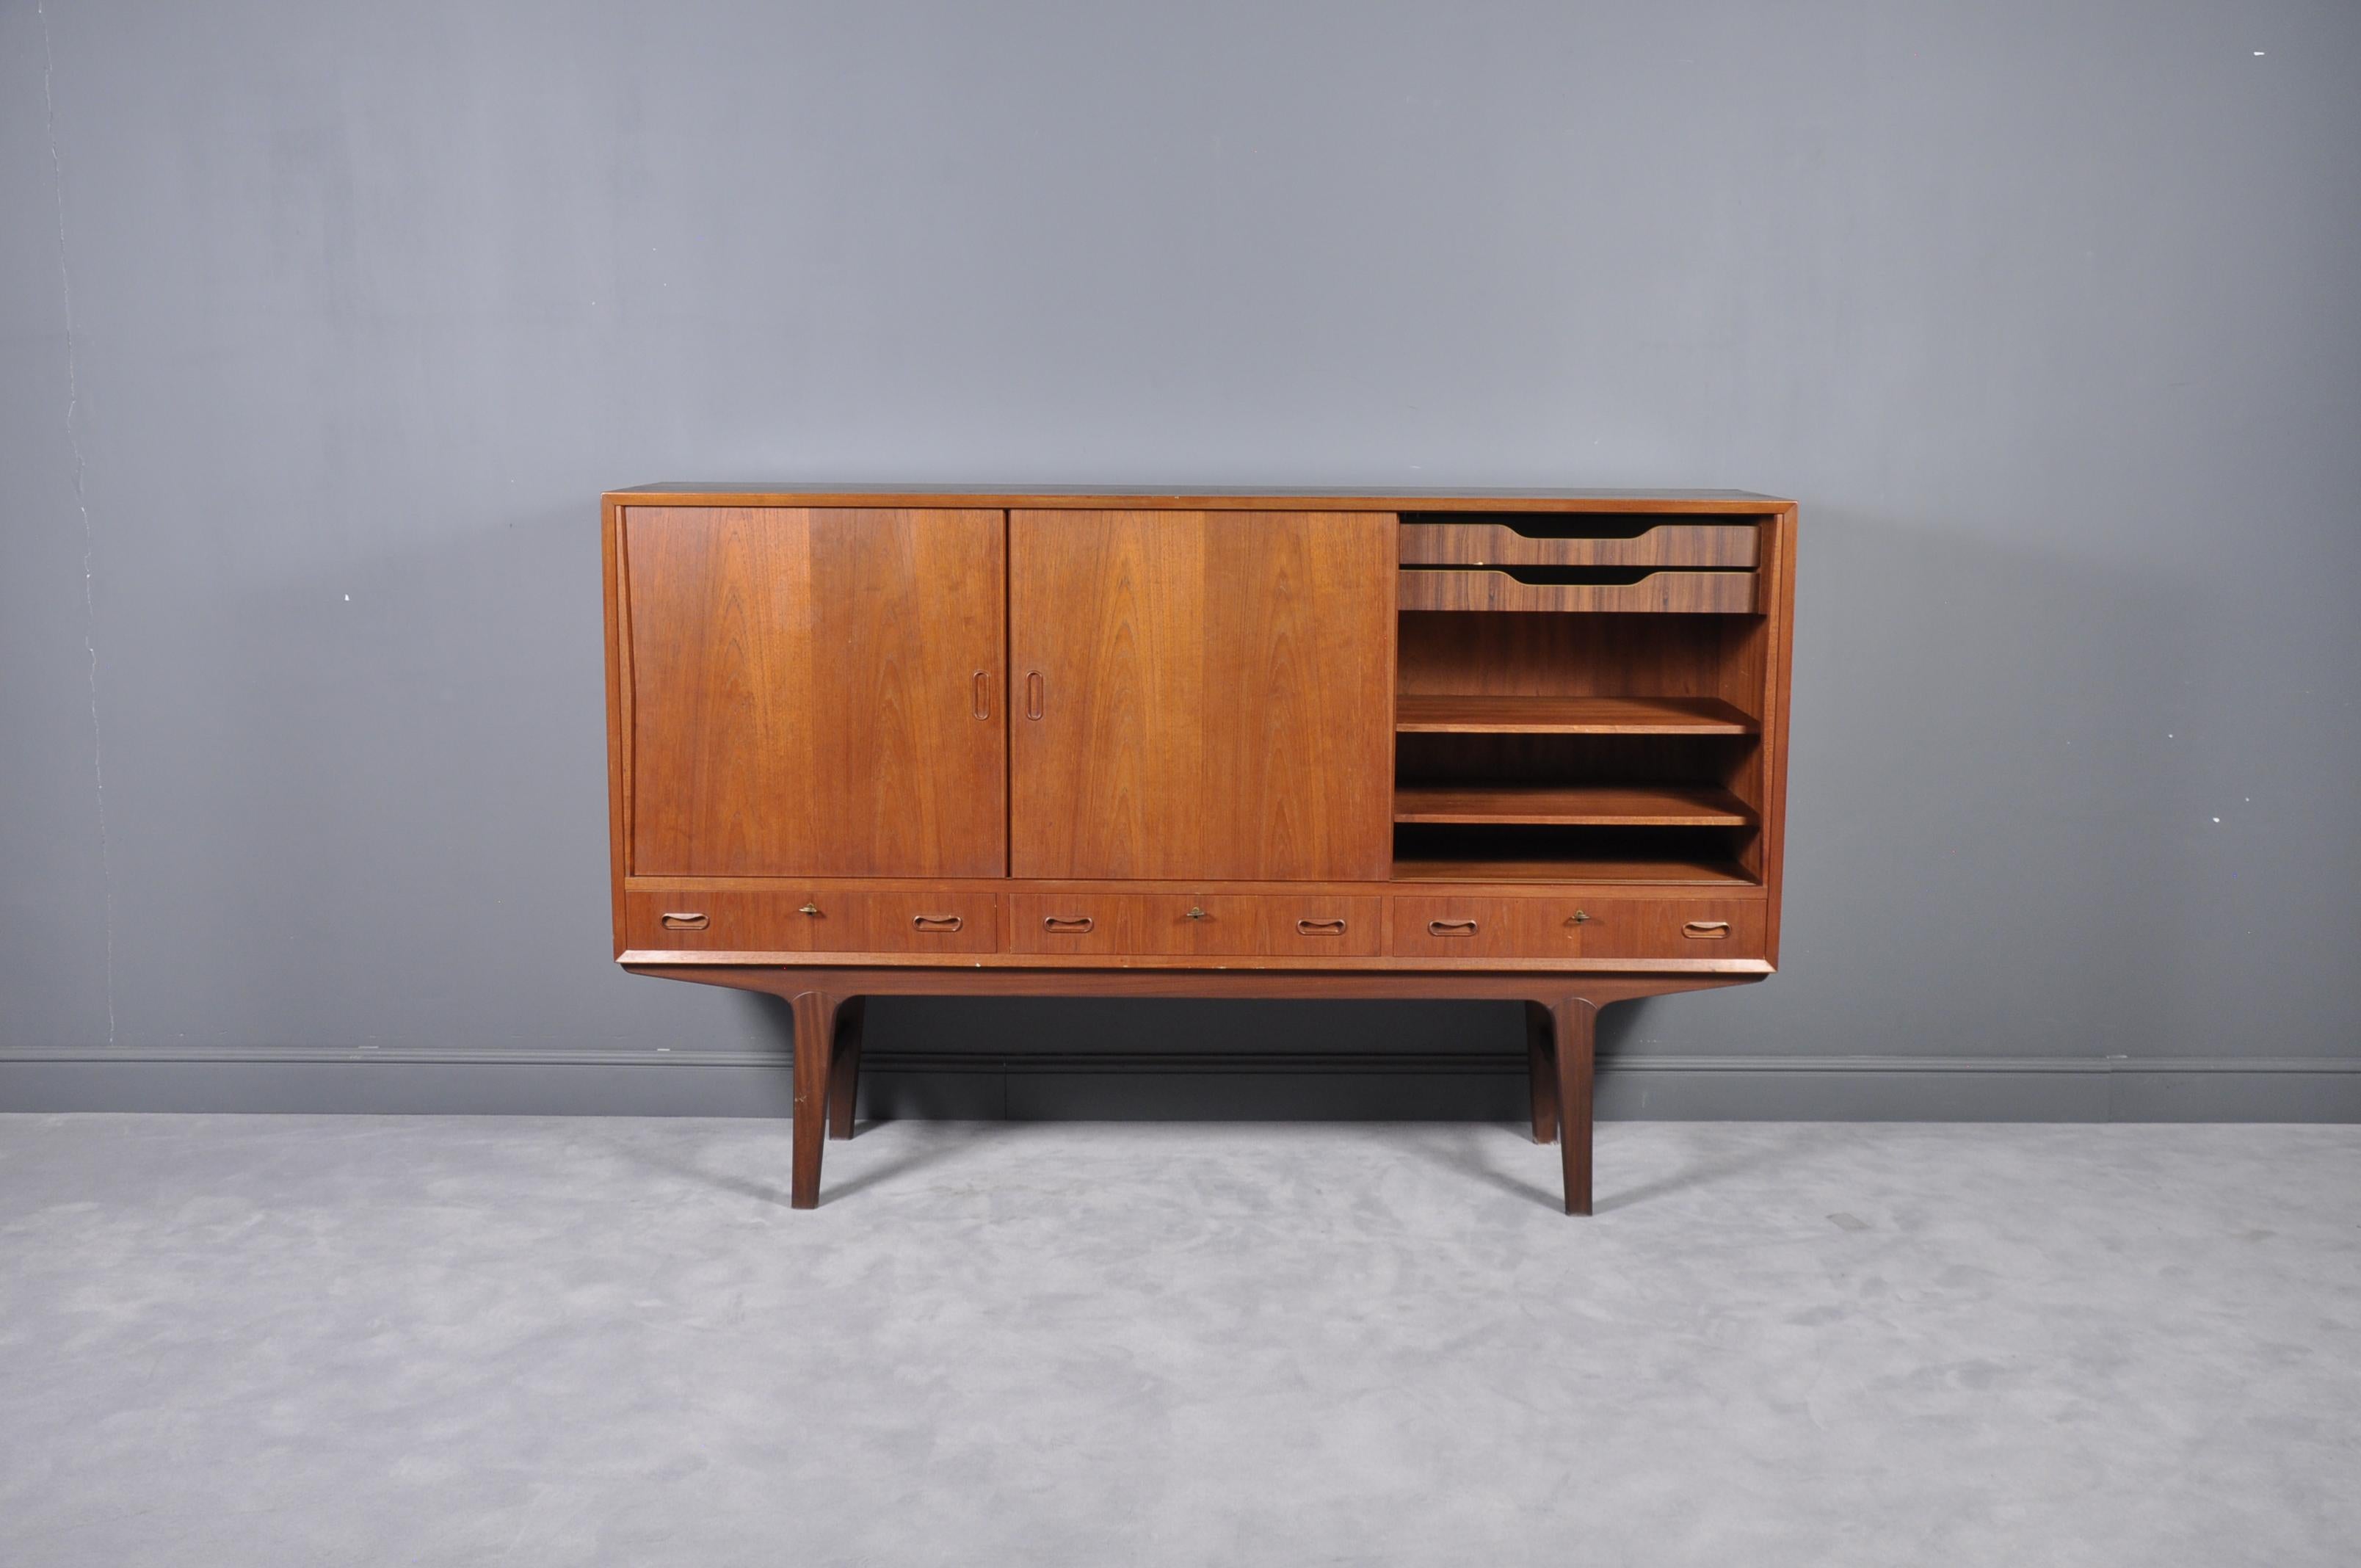 This Scandinavian highboard or credenza was manufactured in Denmark in the 1960s. It features four sliding doors and three separate drawers. The doors, shelves, and legs are made of solid teak, and the frame is teak veneered to ensure a higher